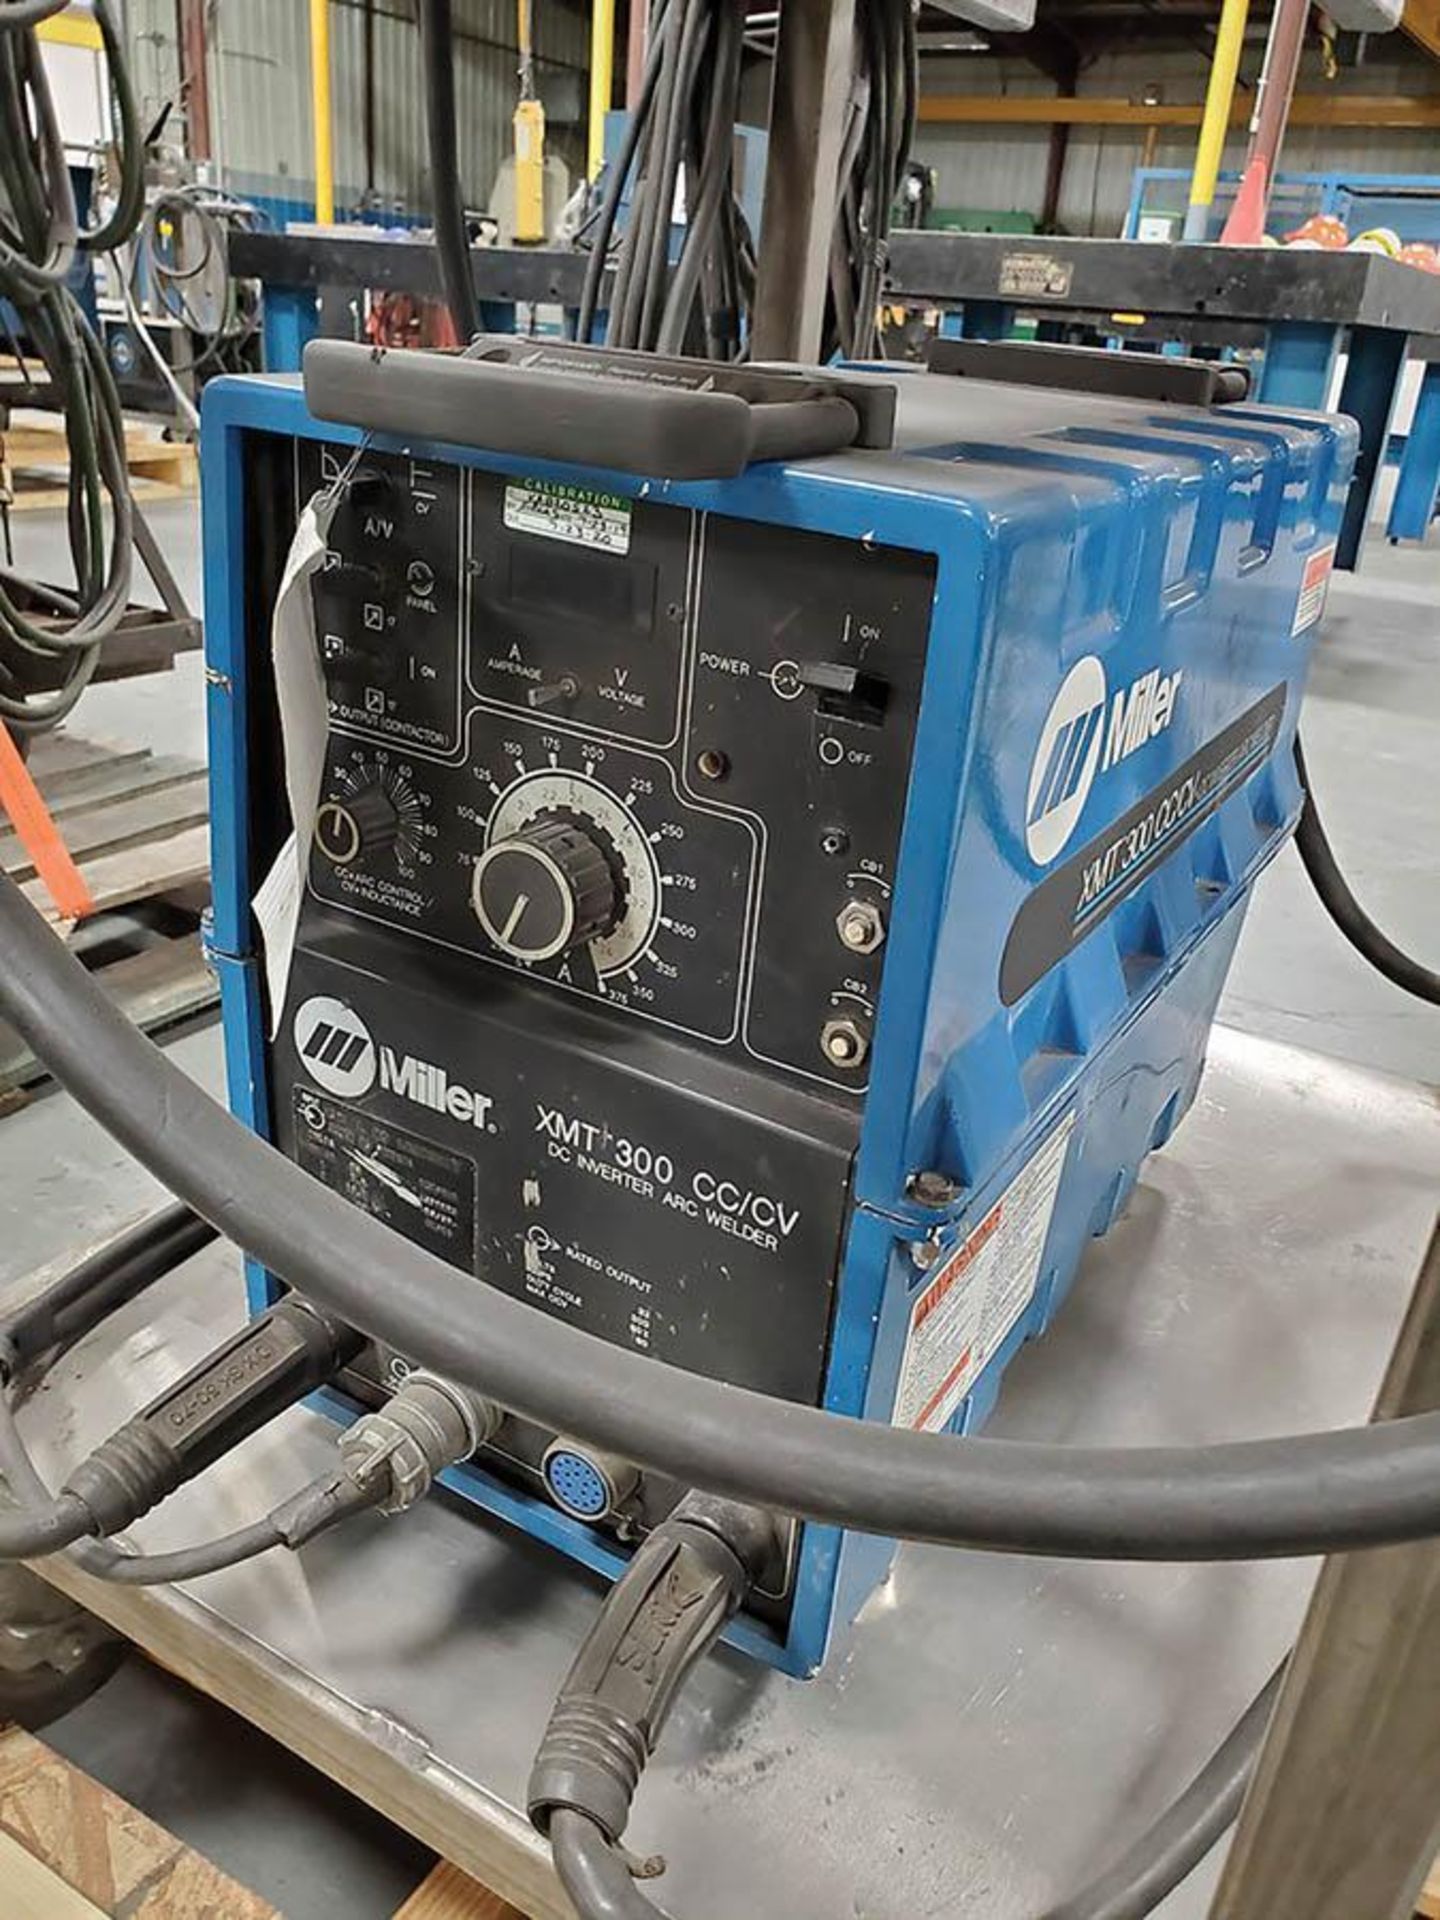 MILLER XMT 300 CC/CV DC INVERTER ARC WELDER ON STAINLESS CART WITH MILLER S-22A 24V CONSTANT WIRE - Image 5 of 5